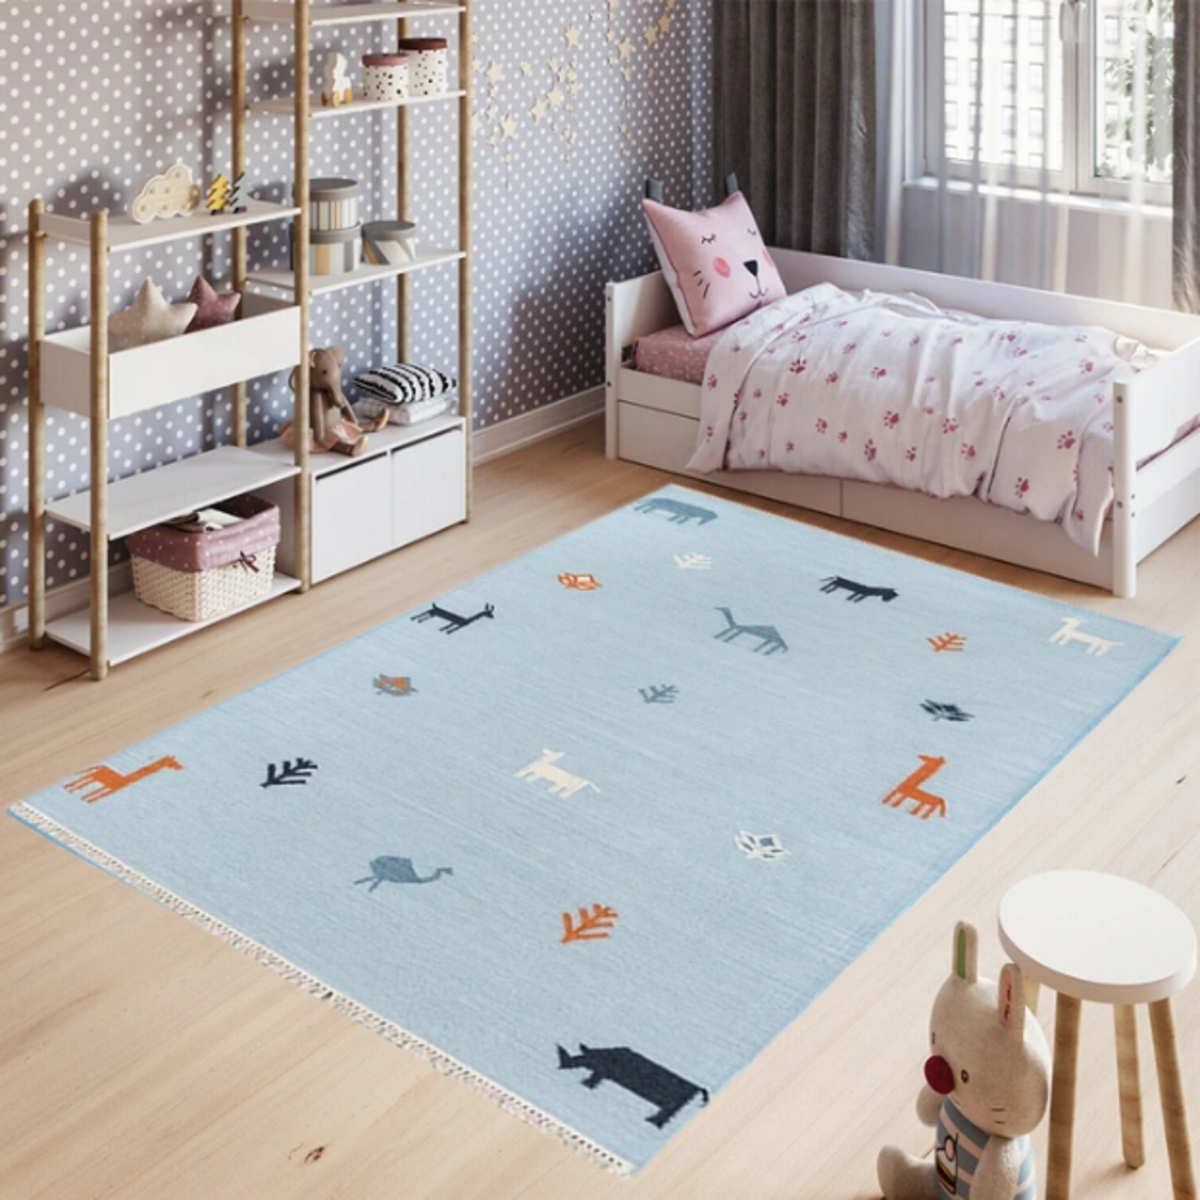 10+ Key Features to Look for Nursery Rugs